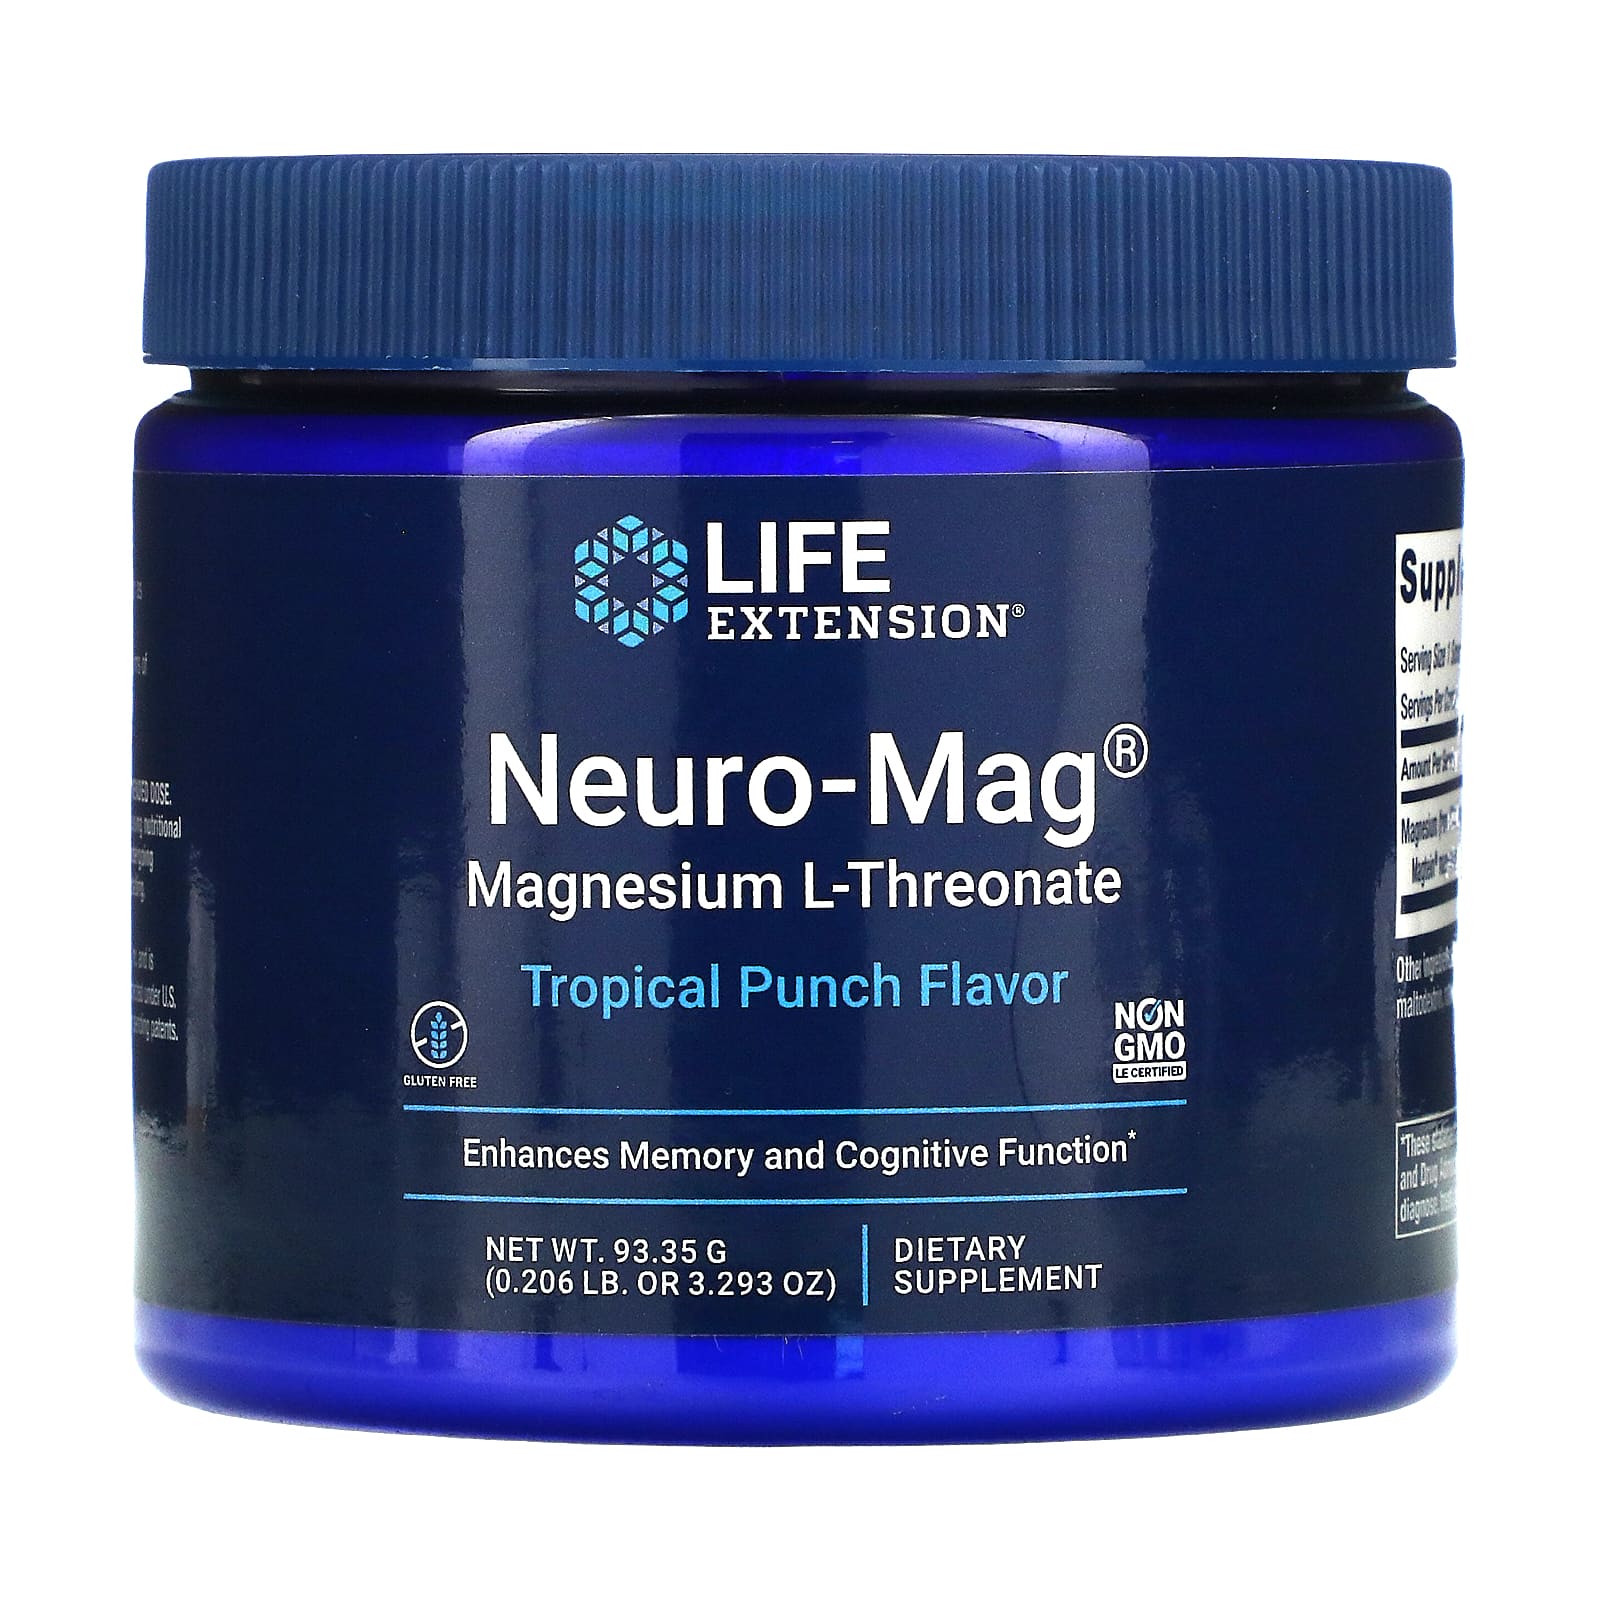 Life Extension Neuro-Mag Magnesium L-Threonate Tropical Punch Flavor 0.206 lb (93.35 g)